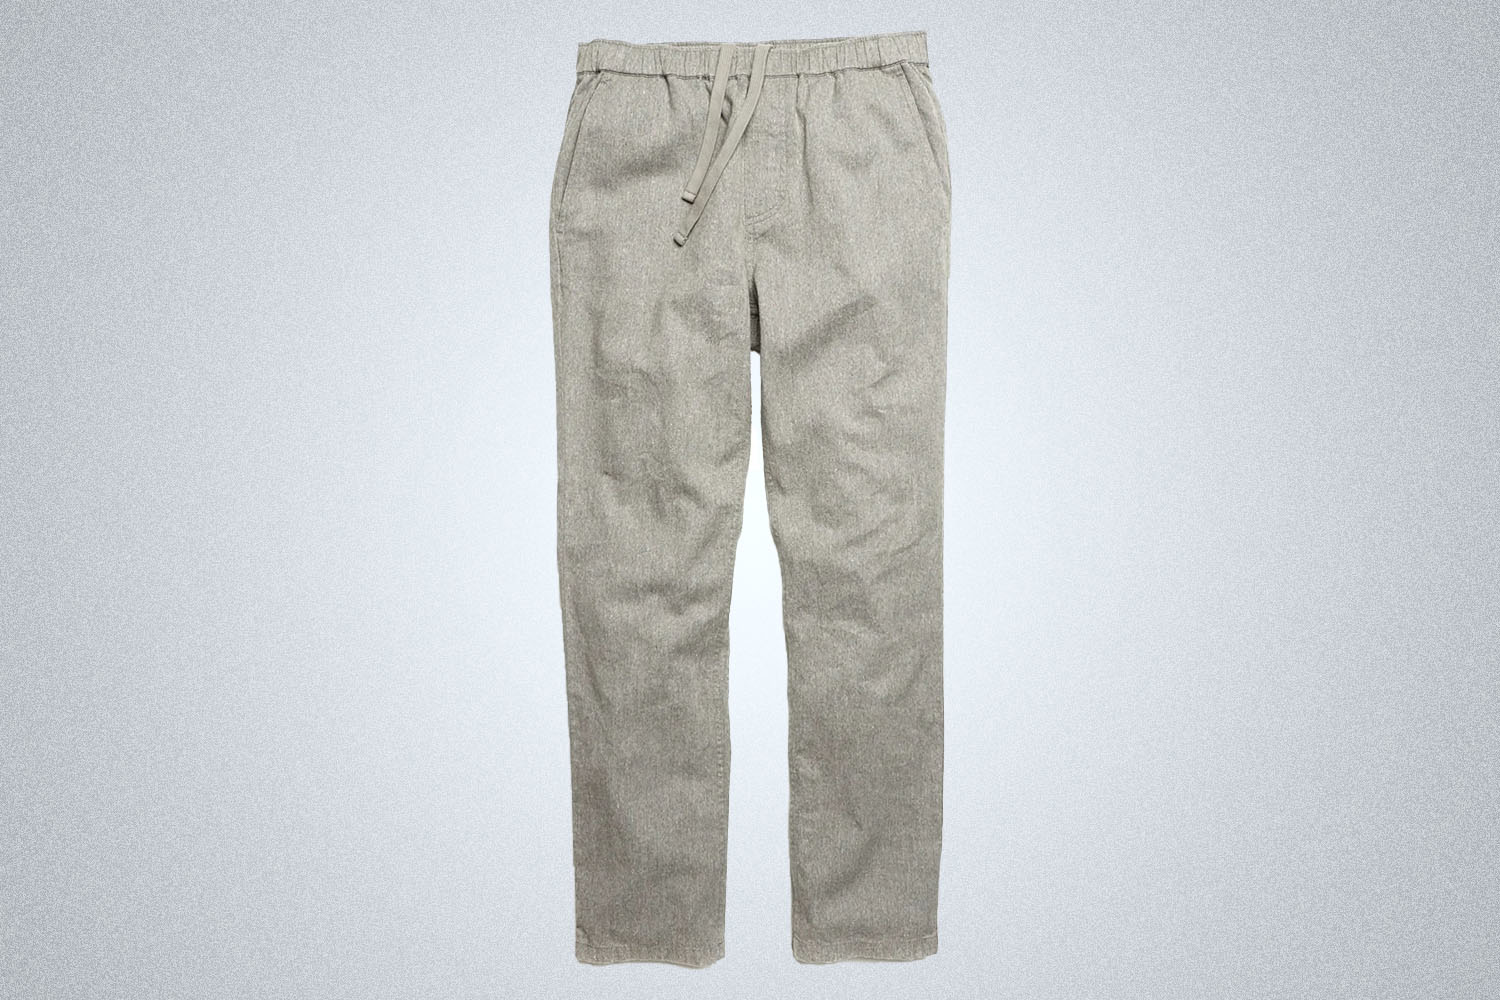 a pair of grey beach pants from Outerknown on a grey background